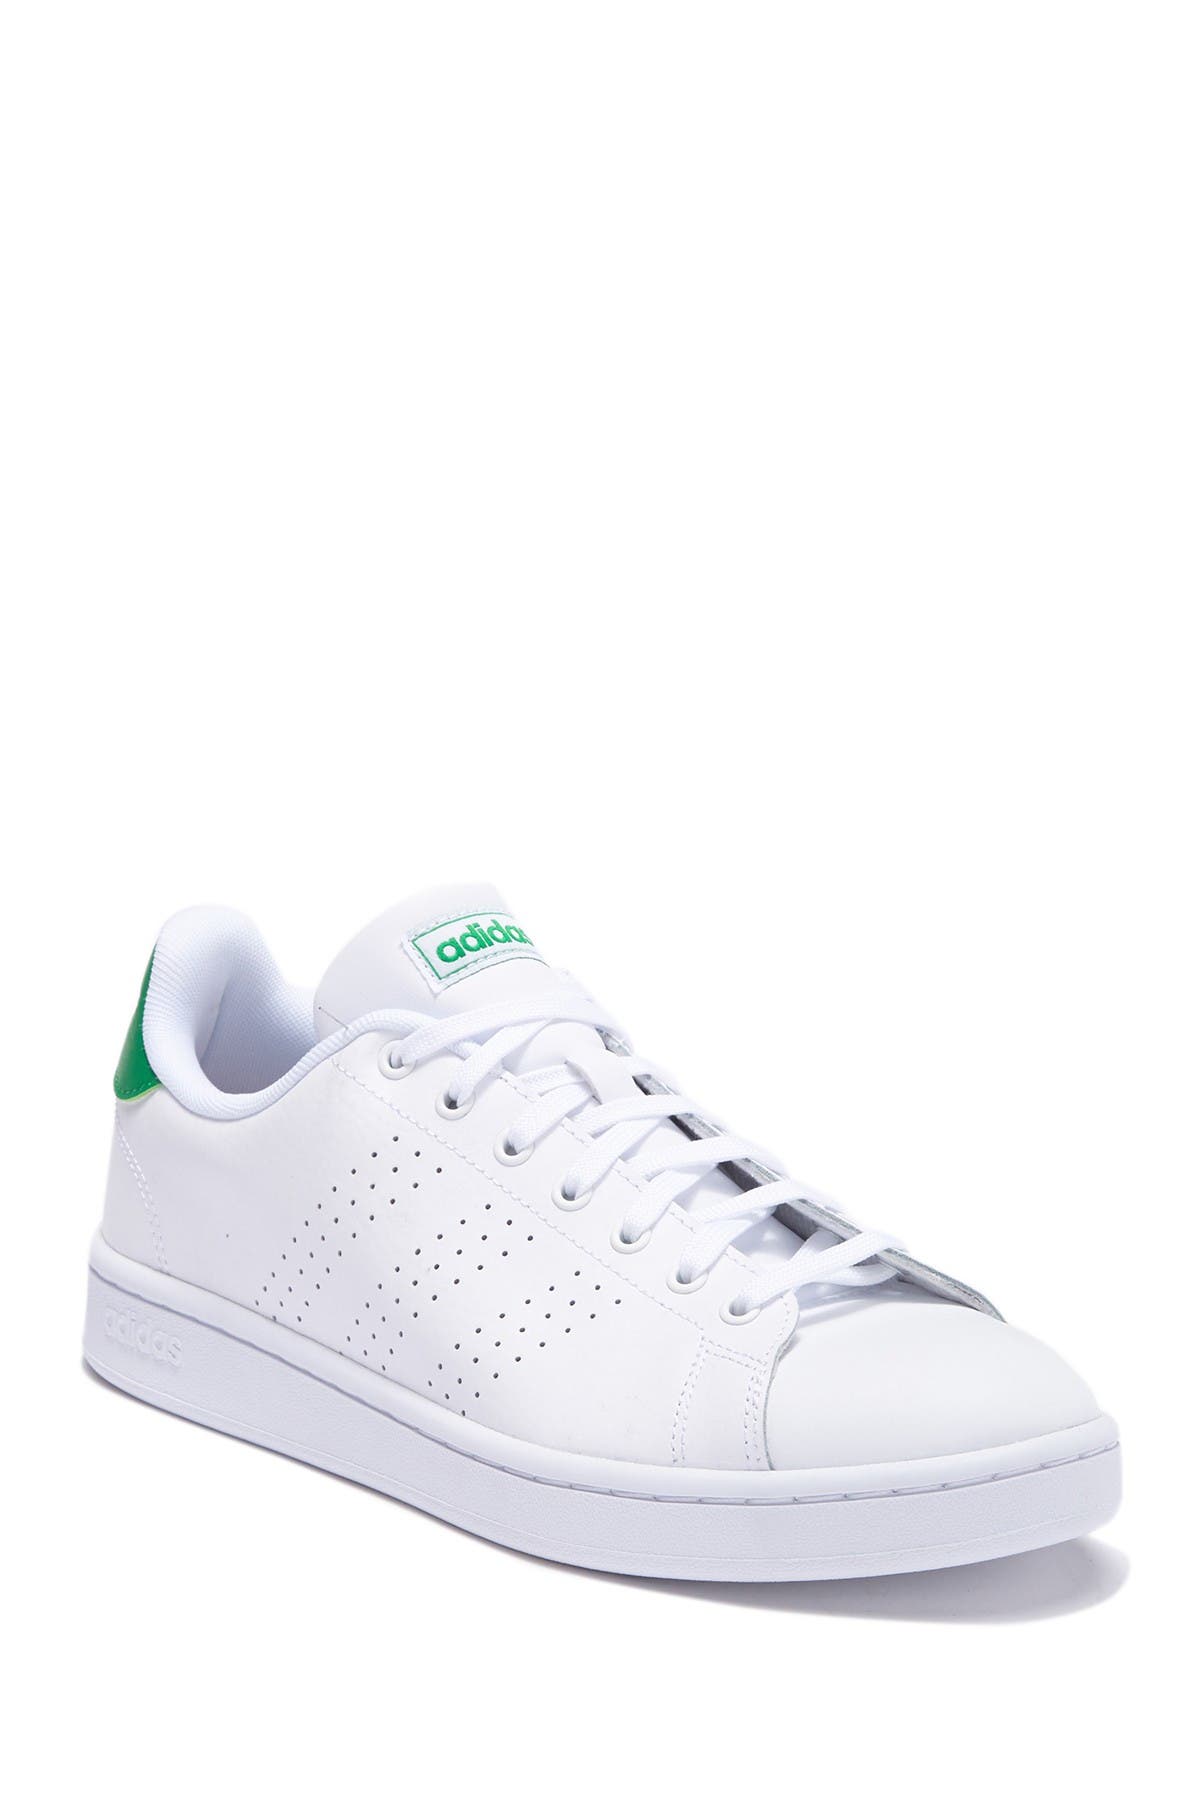 nordstrom white leather sneakers